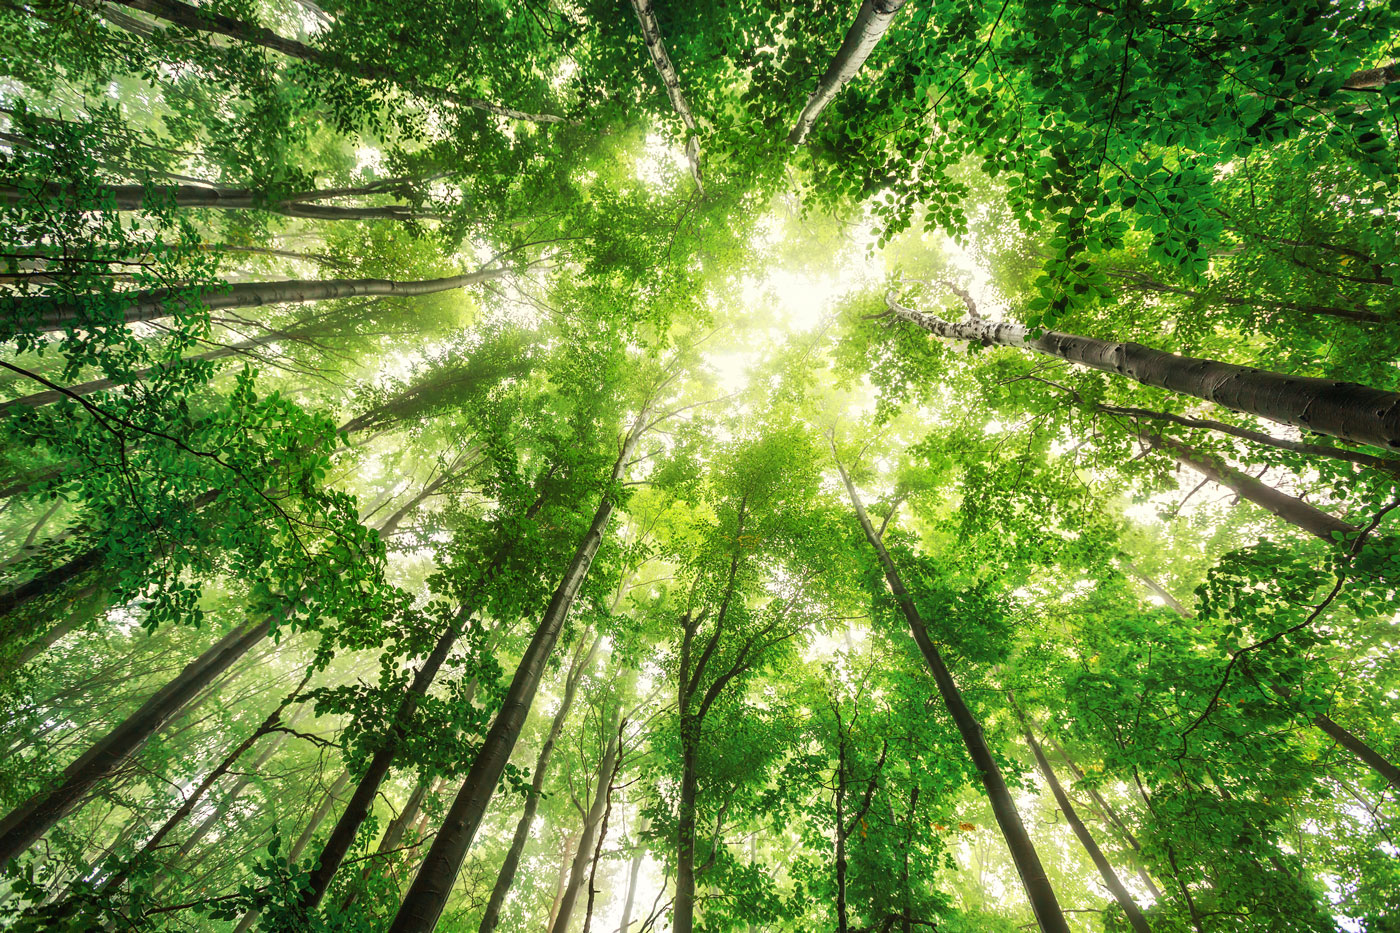 Green investment: Supporting the transition to net zero